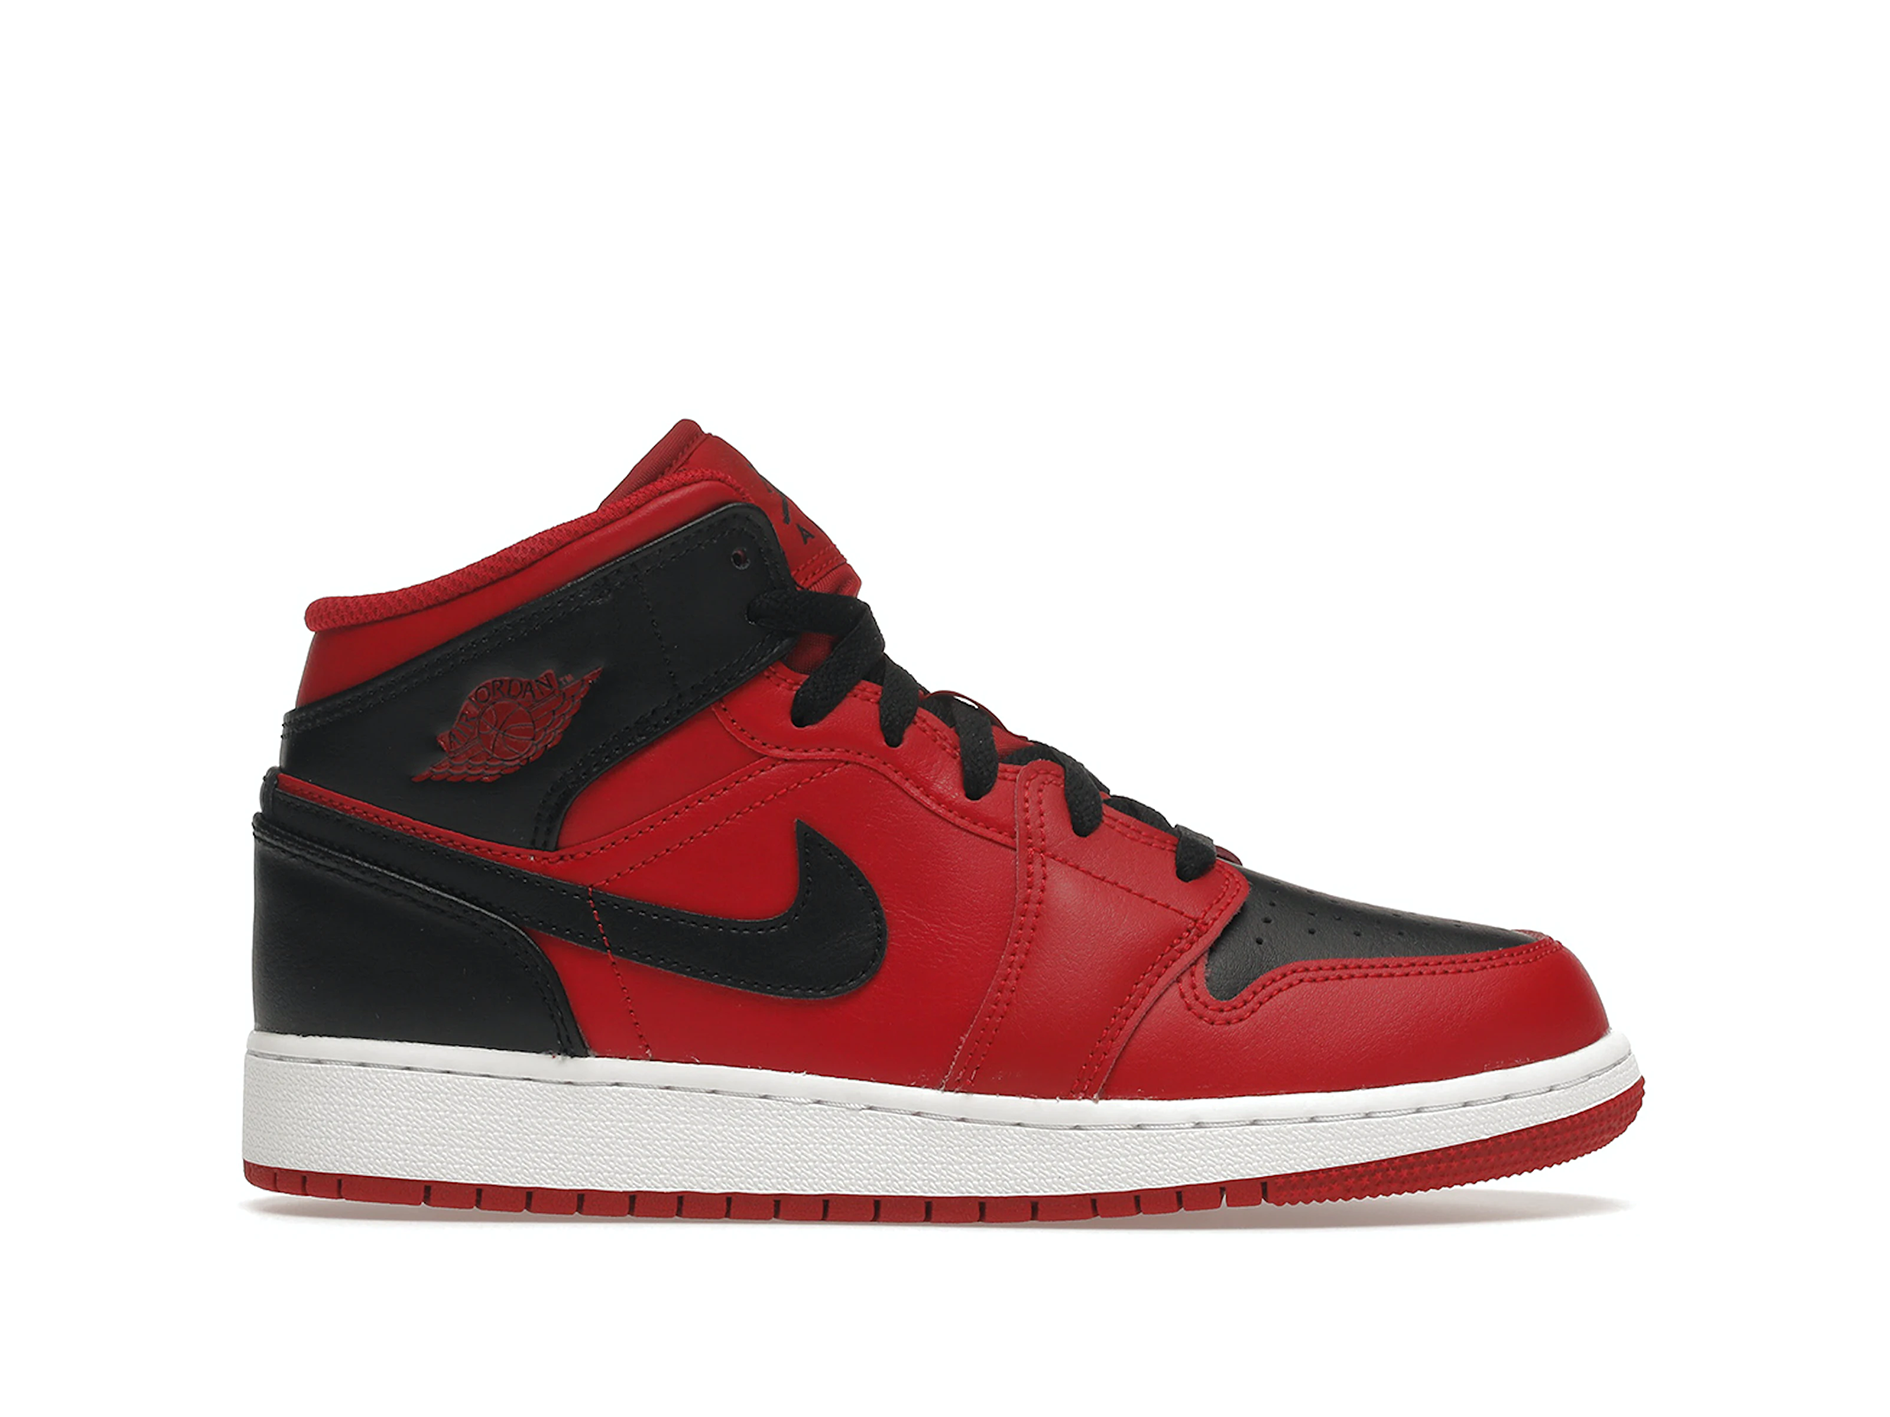 Double Boxed  149.99 Nike Air Jordan 1 Mid Reverse Bred (GS) Double Boxed